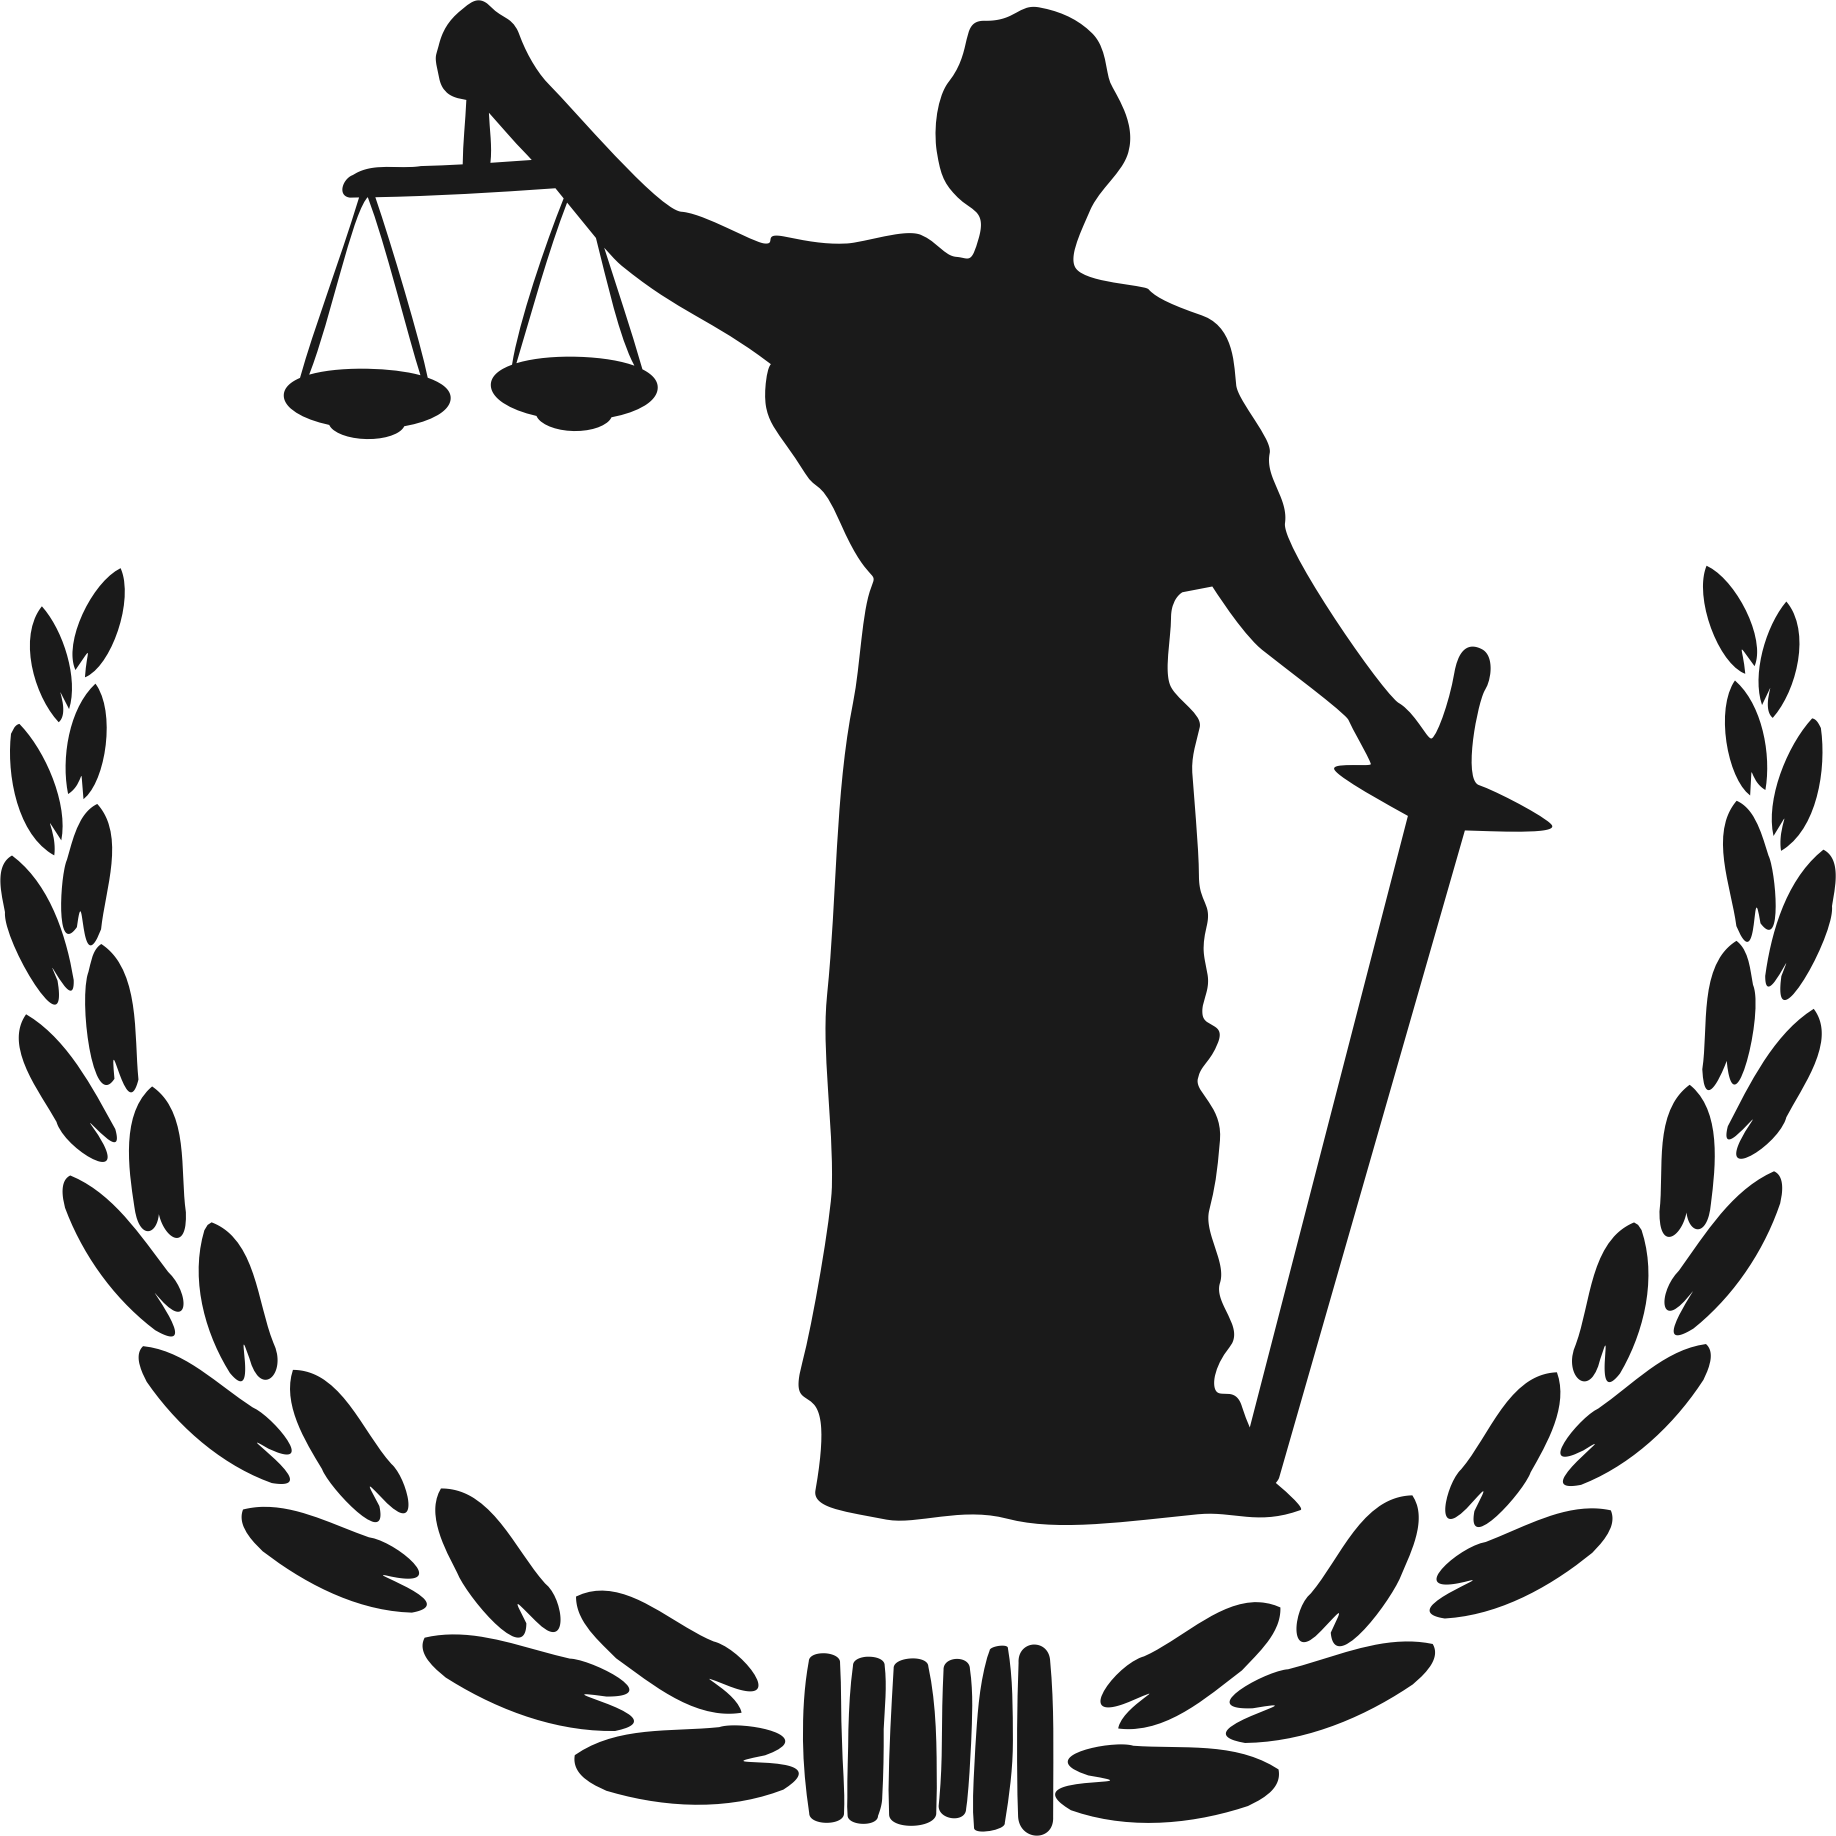 evidence clipart impartial jury